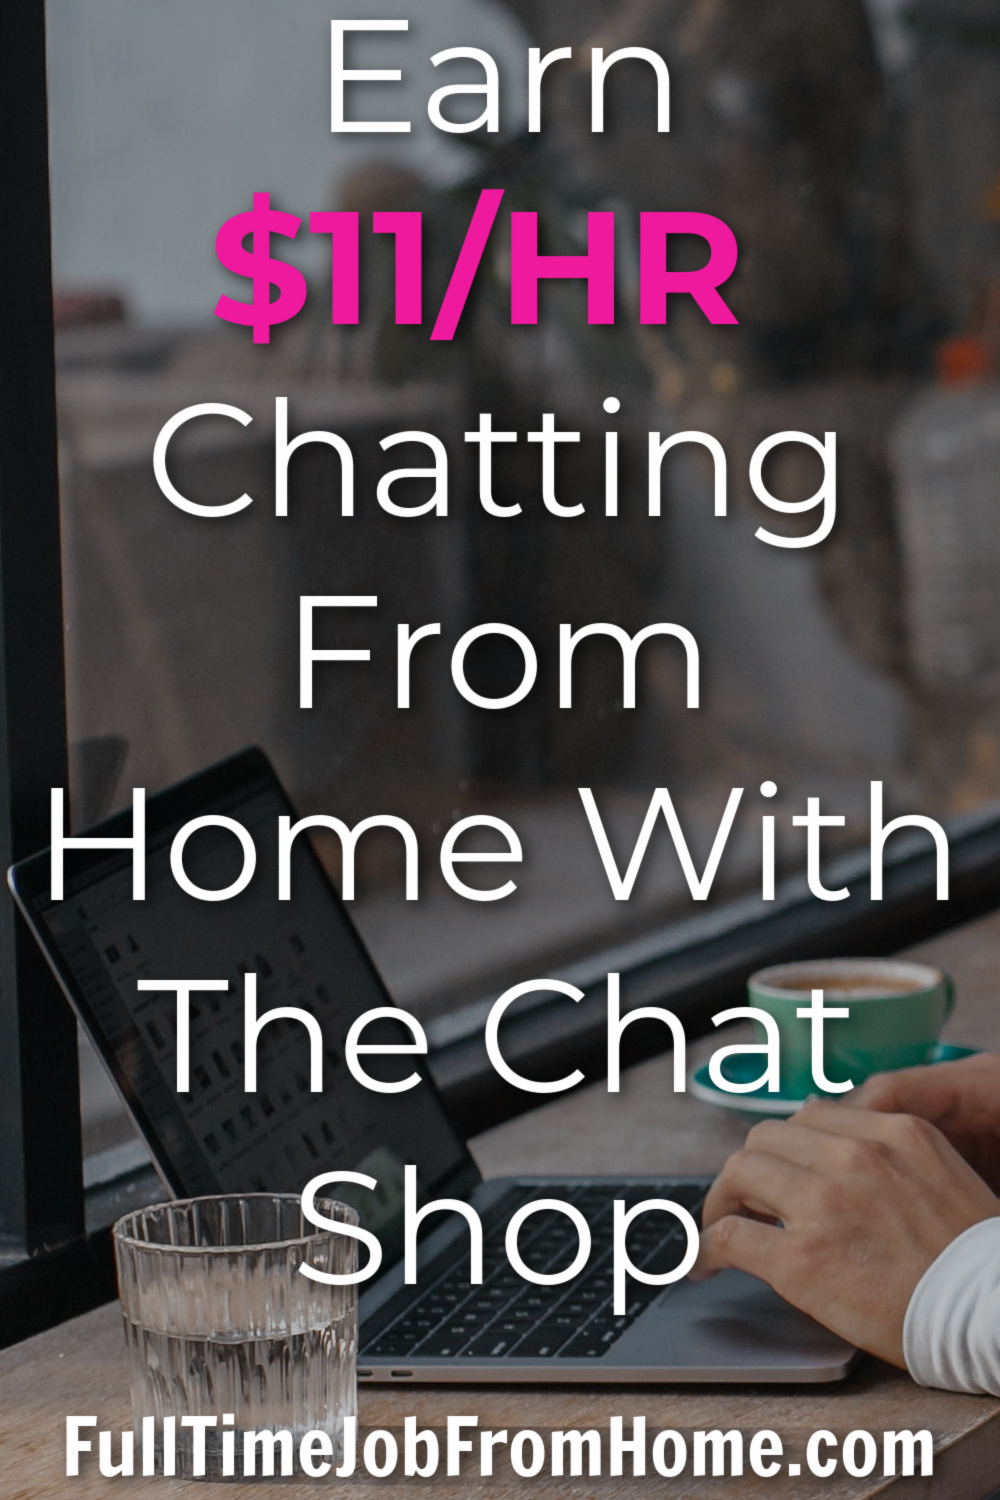 The chat shop